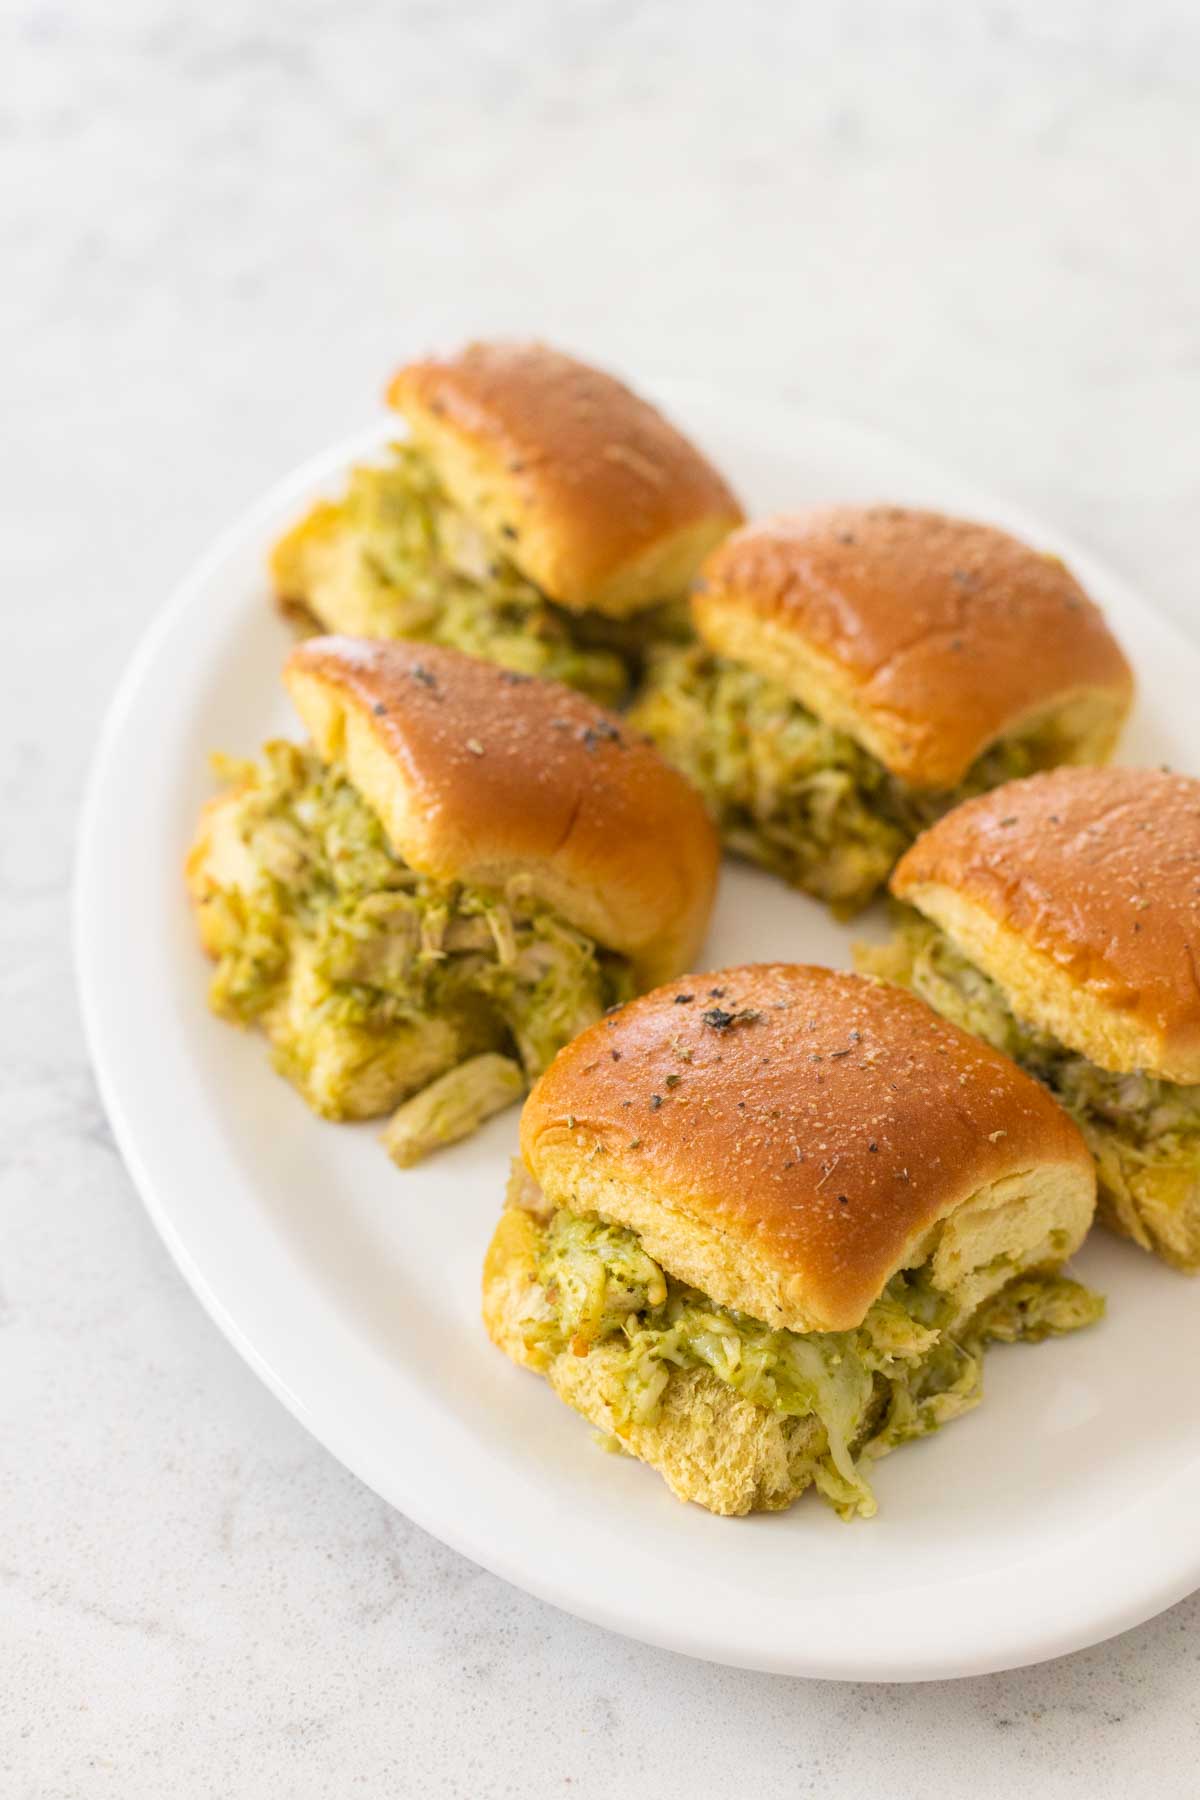 The baked pesto chicken sliders are on a white platter being served.